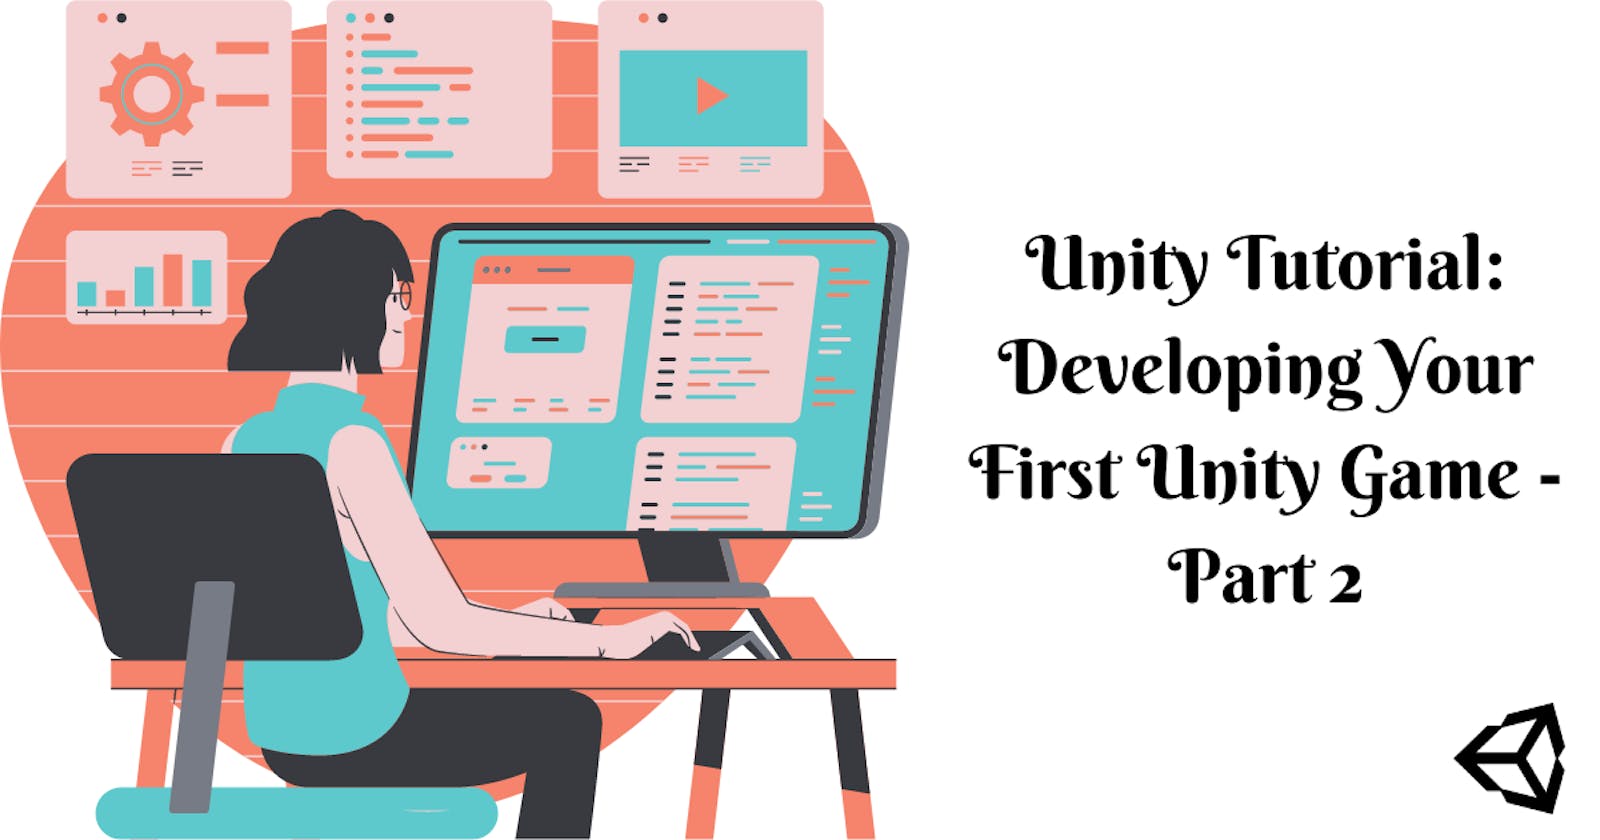 Unity Tutorial: Developing Your First Unity Game - Part 2